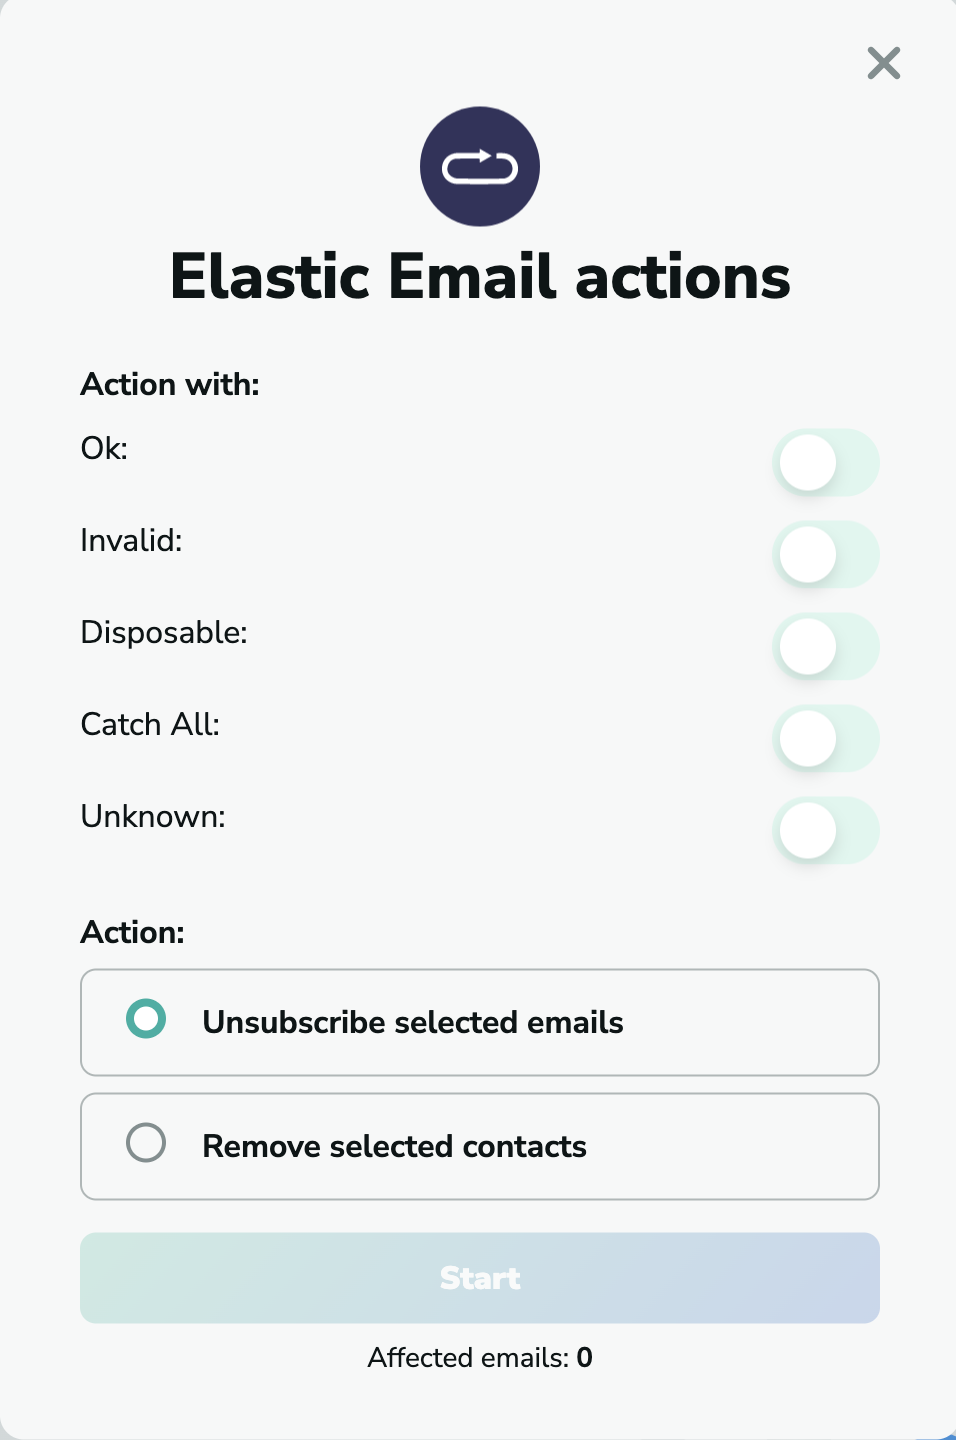 Elastic Email actions in MillionVerifier